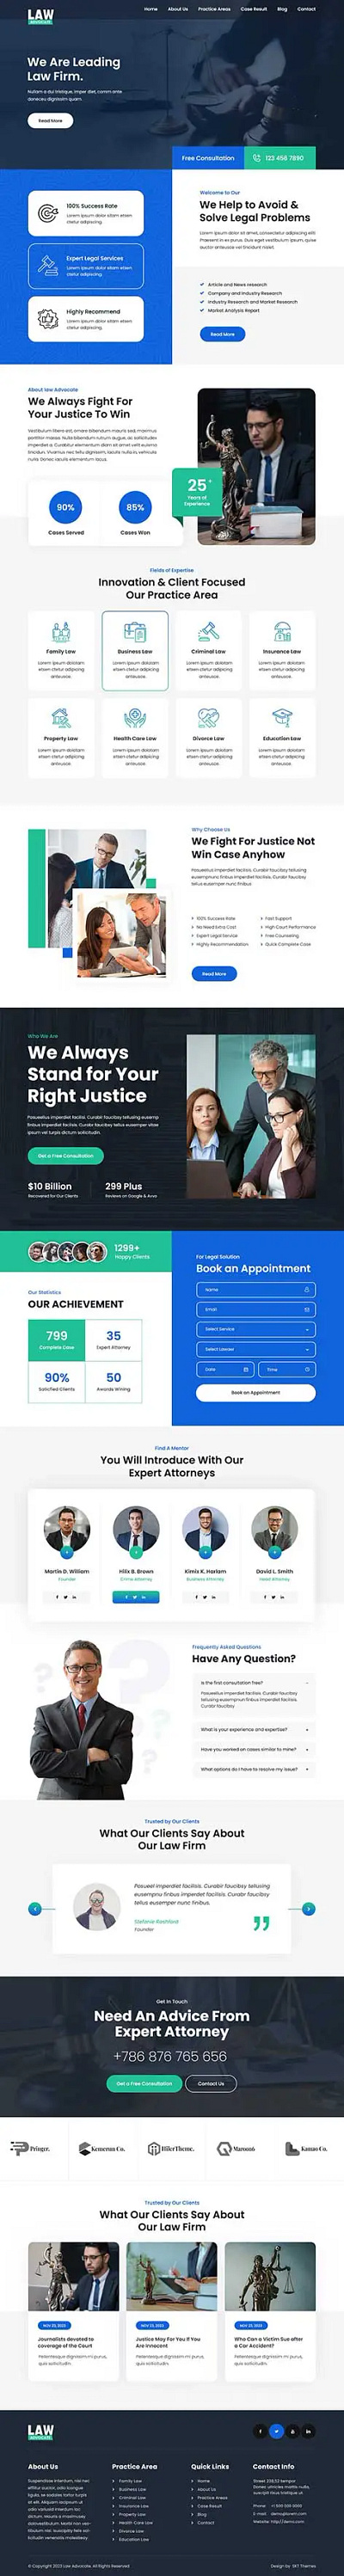 Reliable Barrister WordPress Theme for Attorney Legal Advice lawyerswordpresstheme lawyerswordpressthemetobuy wordpresstheme